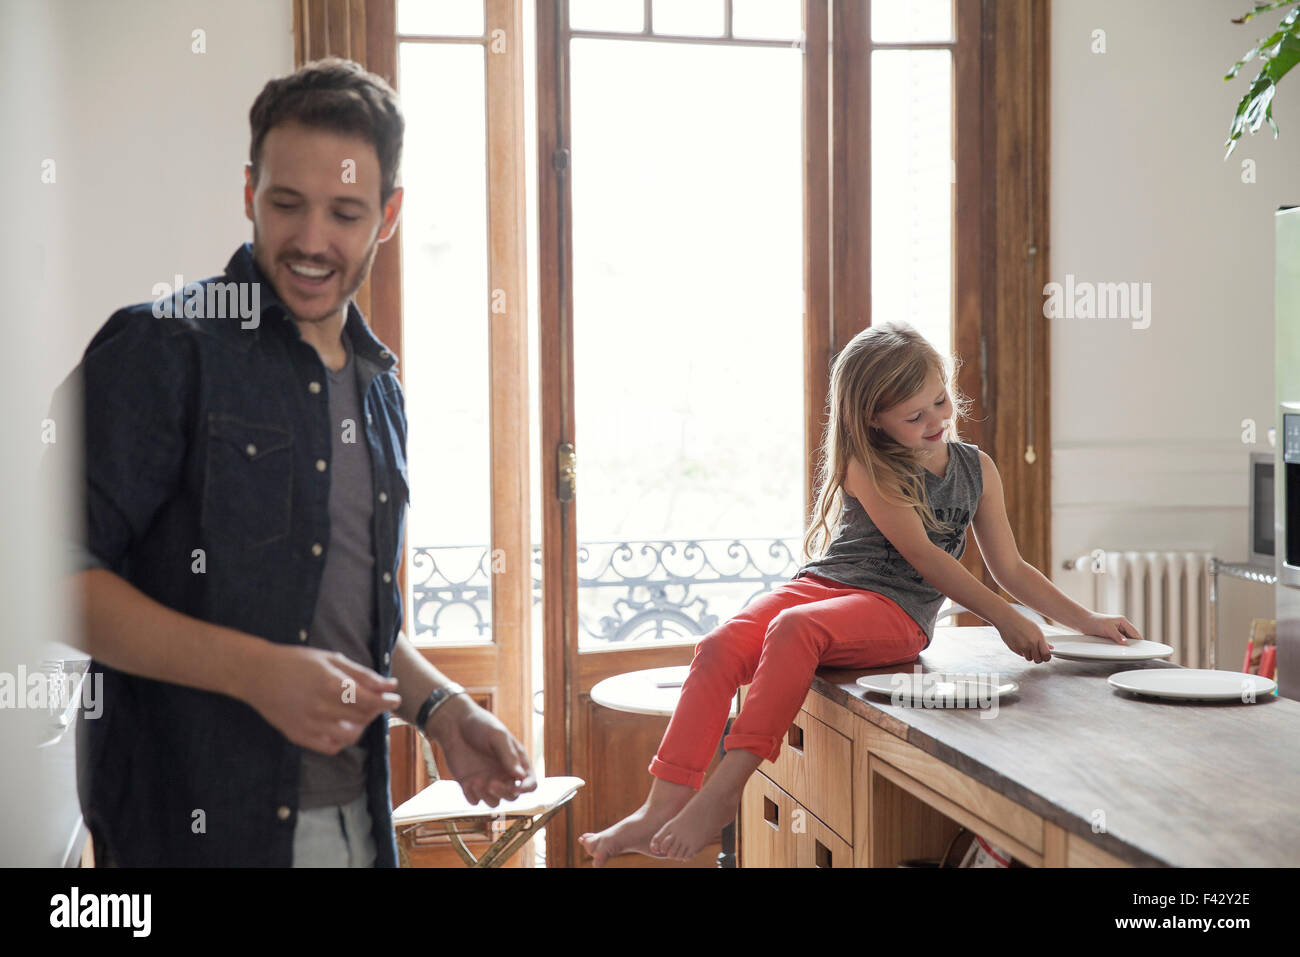 Girl helping father set table for family meal Stock Photo